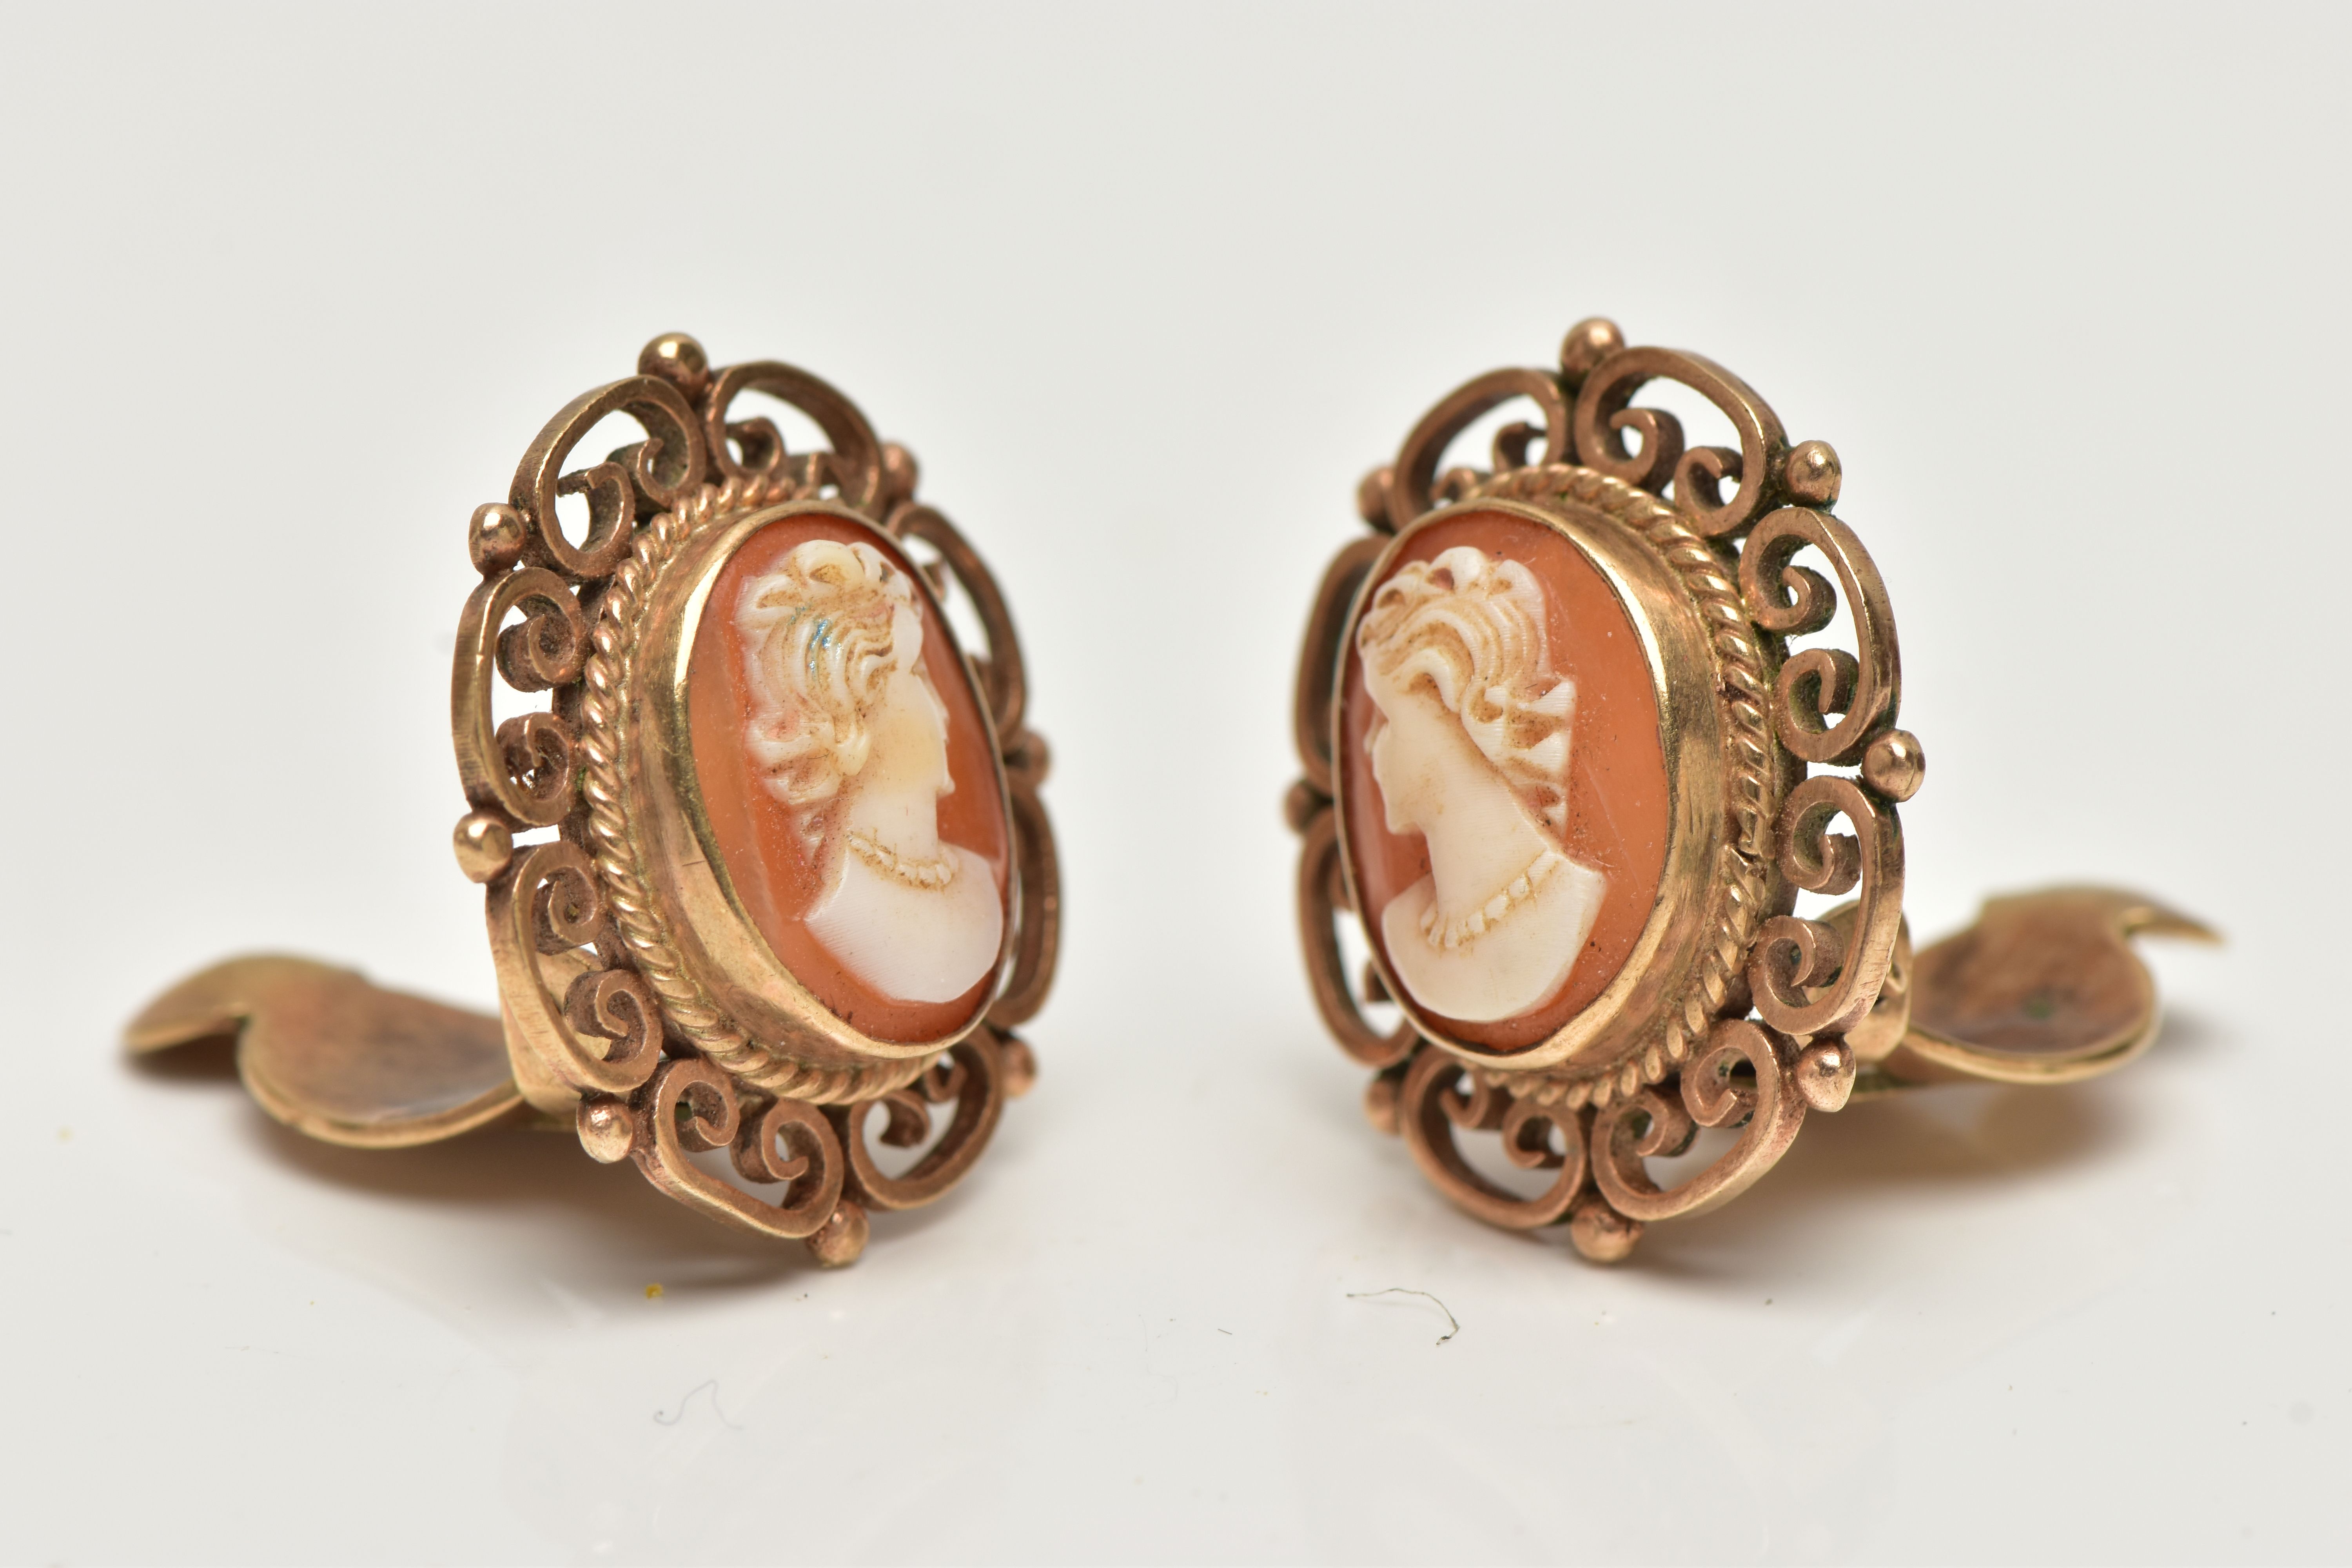 A PAIR OF YELLOW METAL CAMEO EARRINGS, each earring set with a carved shell cameo, depicting a - Image 2 of 3